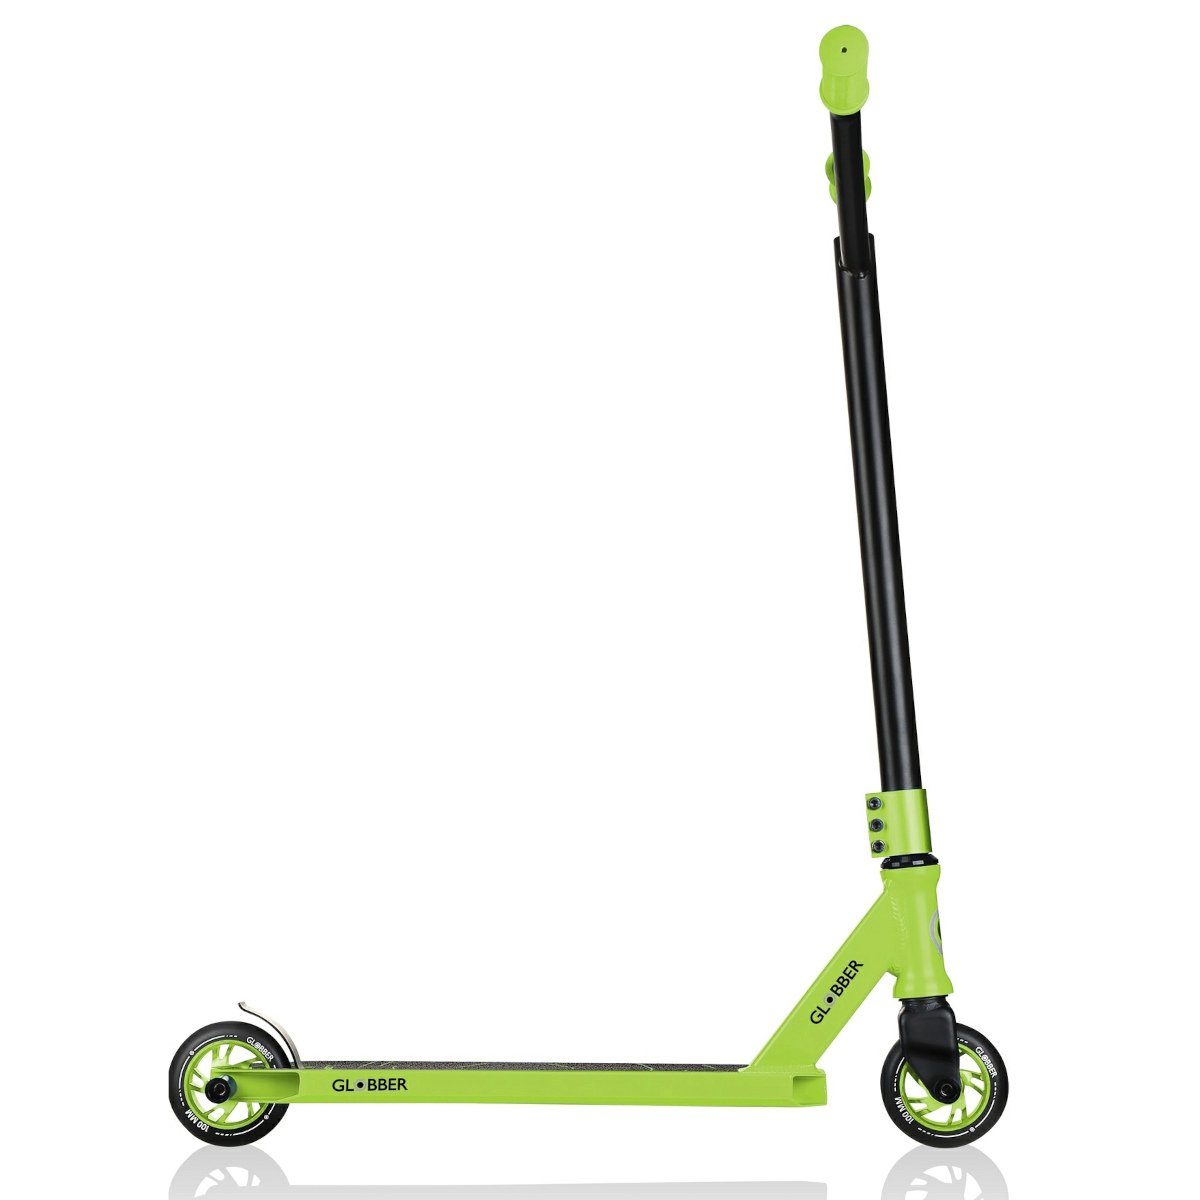 authentic sports Sports Schwarz-Lime & Grün 540 Authentic toys Globber Laufrad Stuntscooter GS